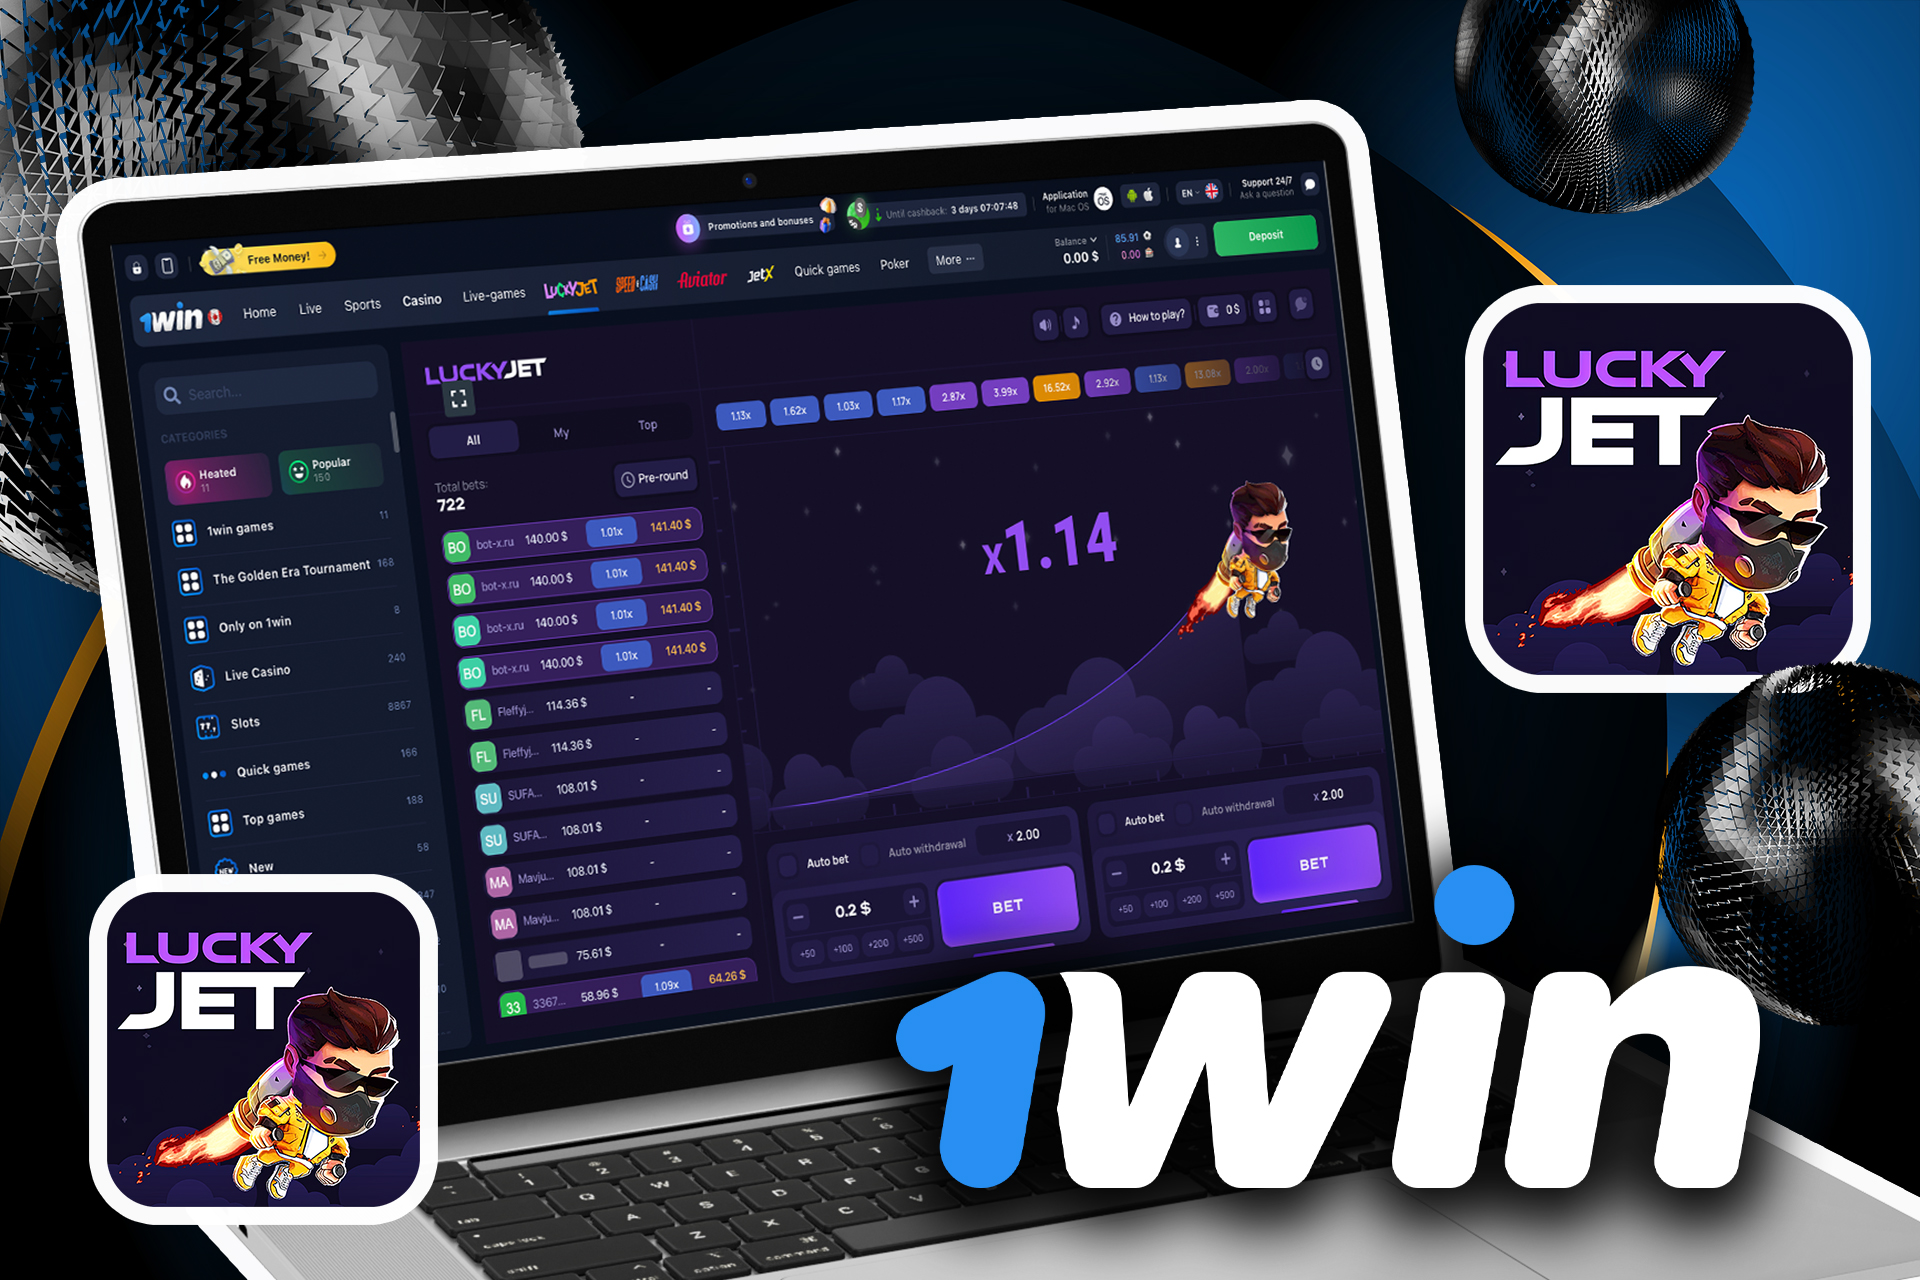 Register on the 1win website, top up your account and start playing Lucky Jet.